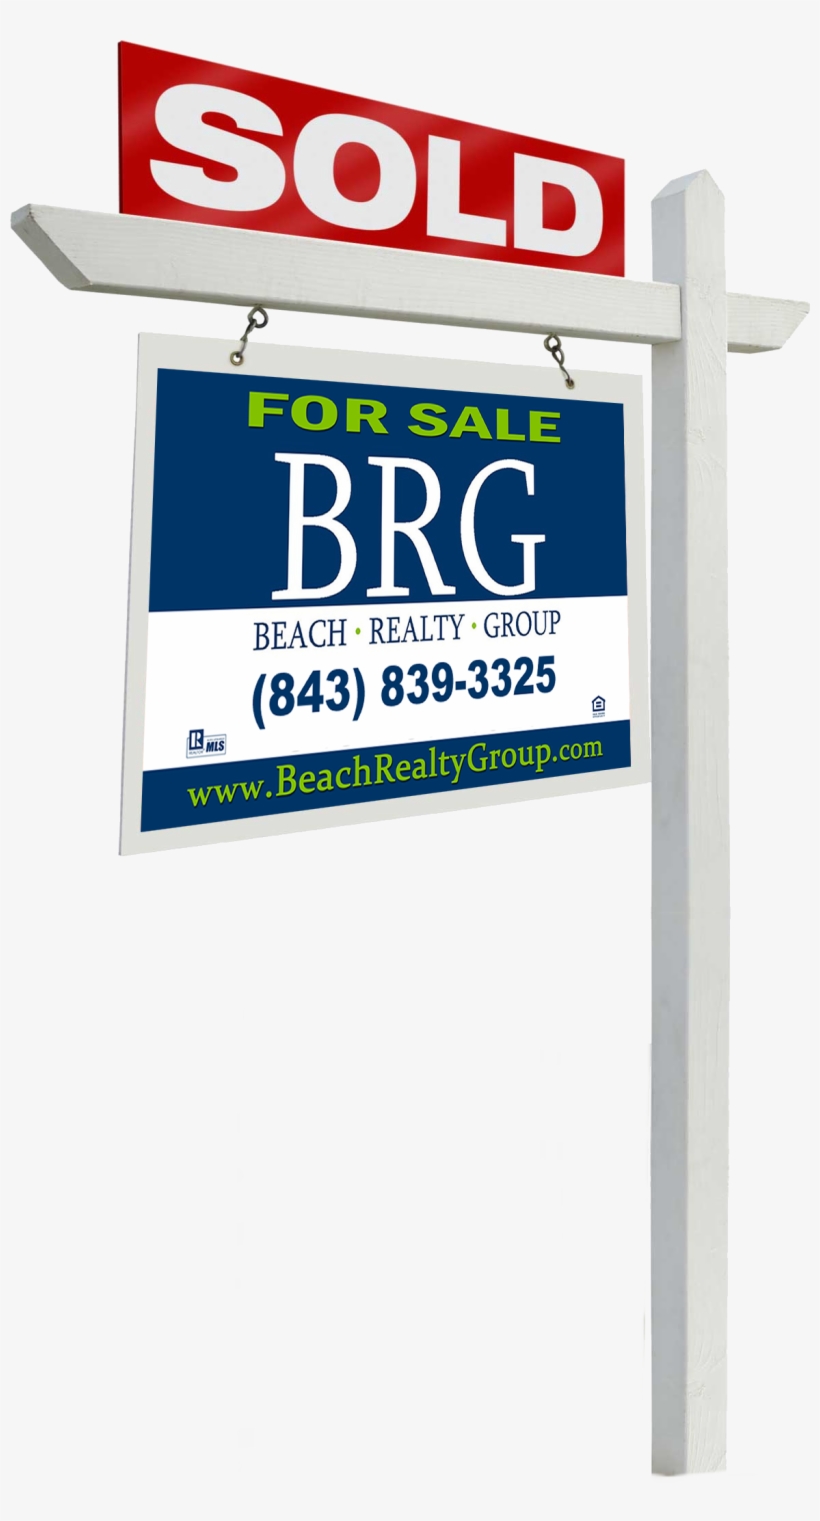 1170 X 2114 5 - Sold Yard Sign Png, transparent png #7920276